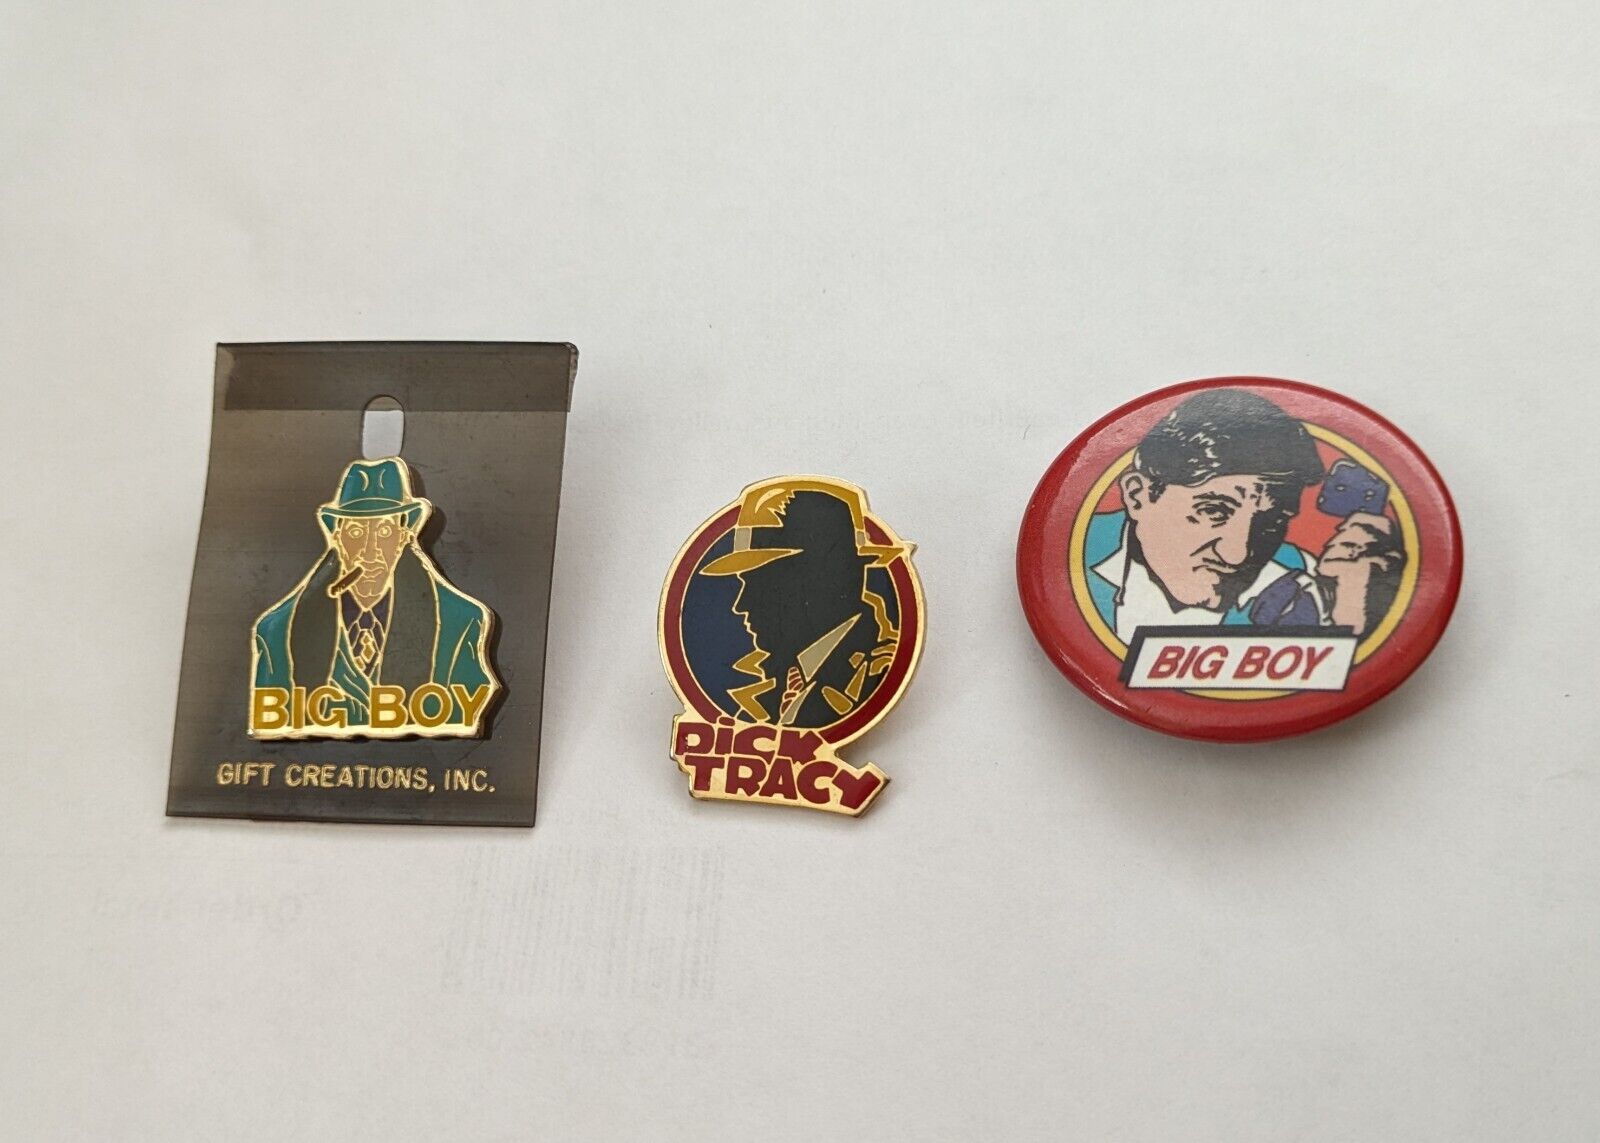 DICK TRACEY & FRIENDS PINS